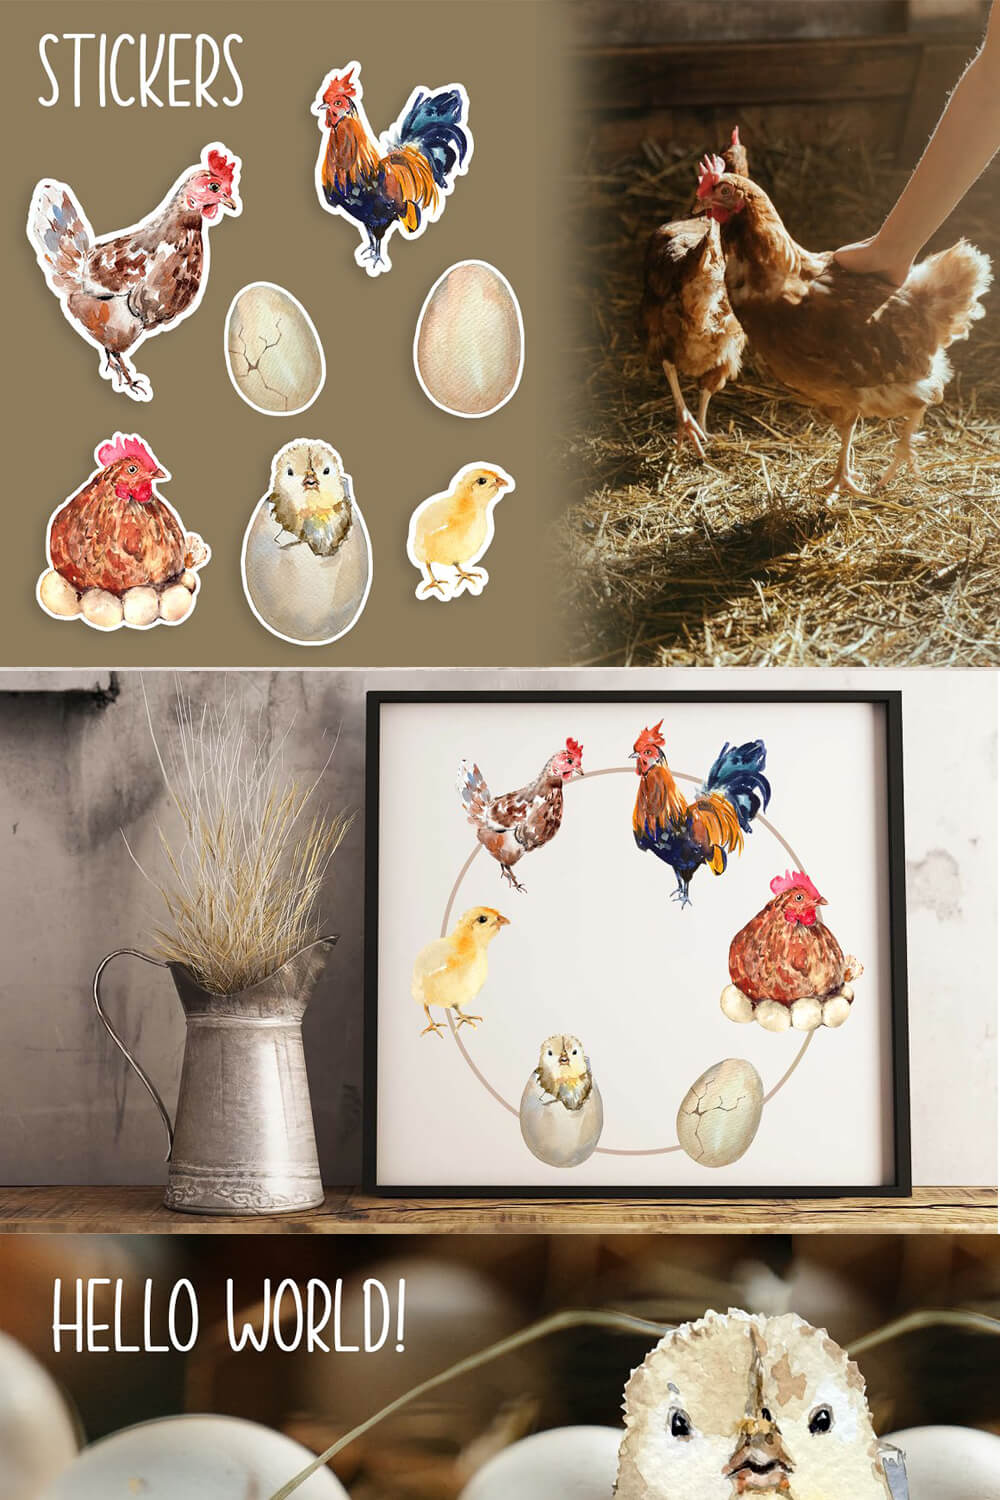 Chicken life cycle, Inscription: Stickers, Hello world.